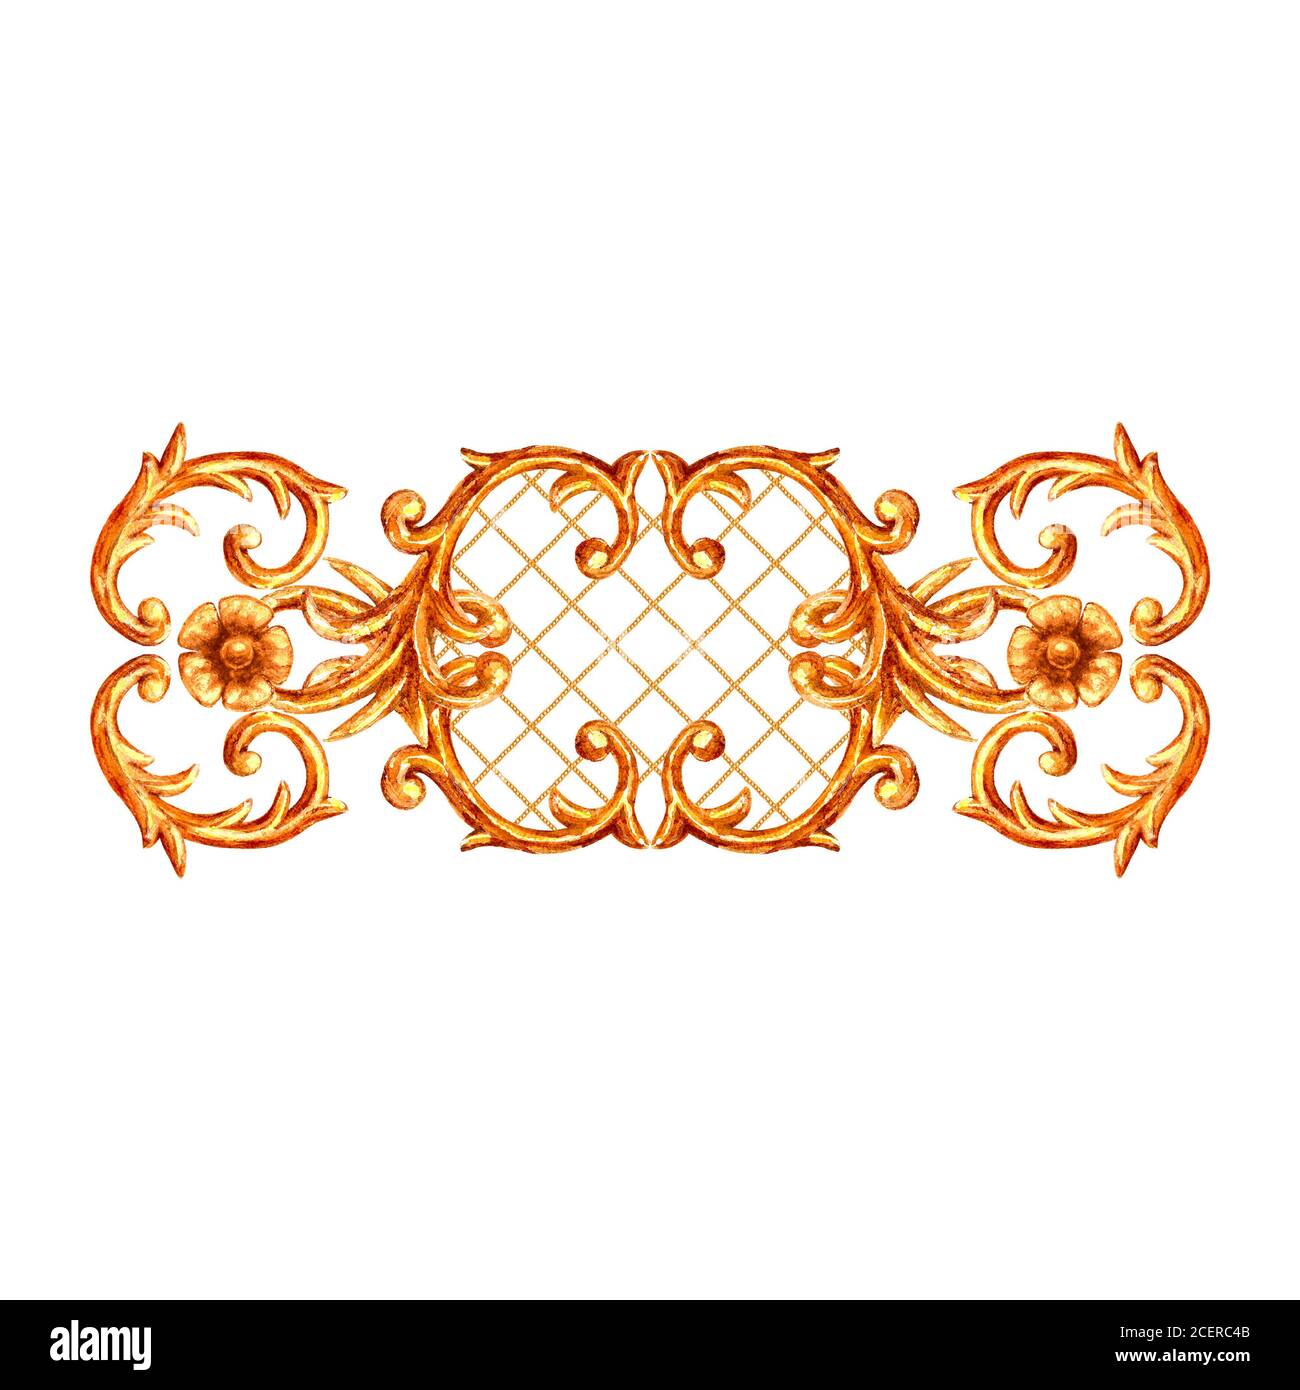 Baroque style golden ornamental element. Watercolor hand drawn gold segment with scrolls, leaves, chains and elements on white background. Watercolour Stock Photo